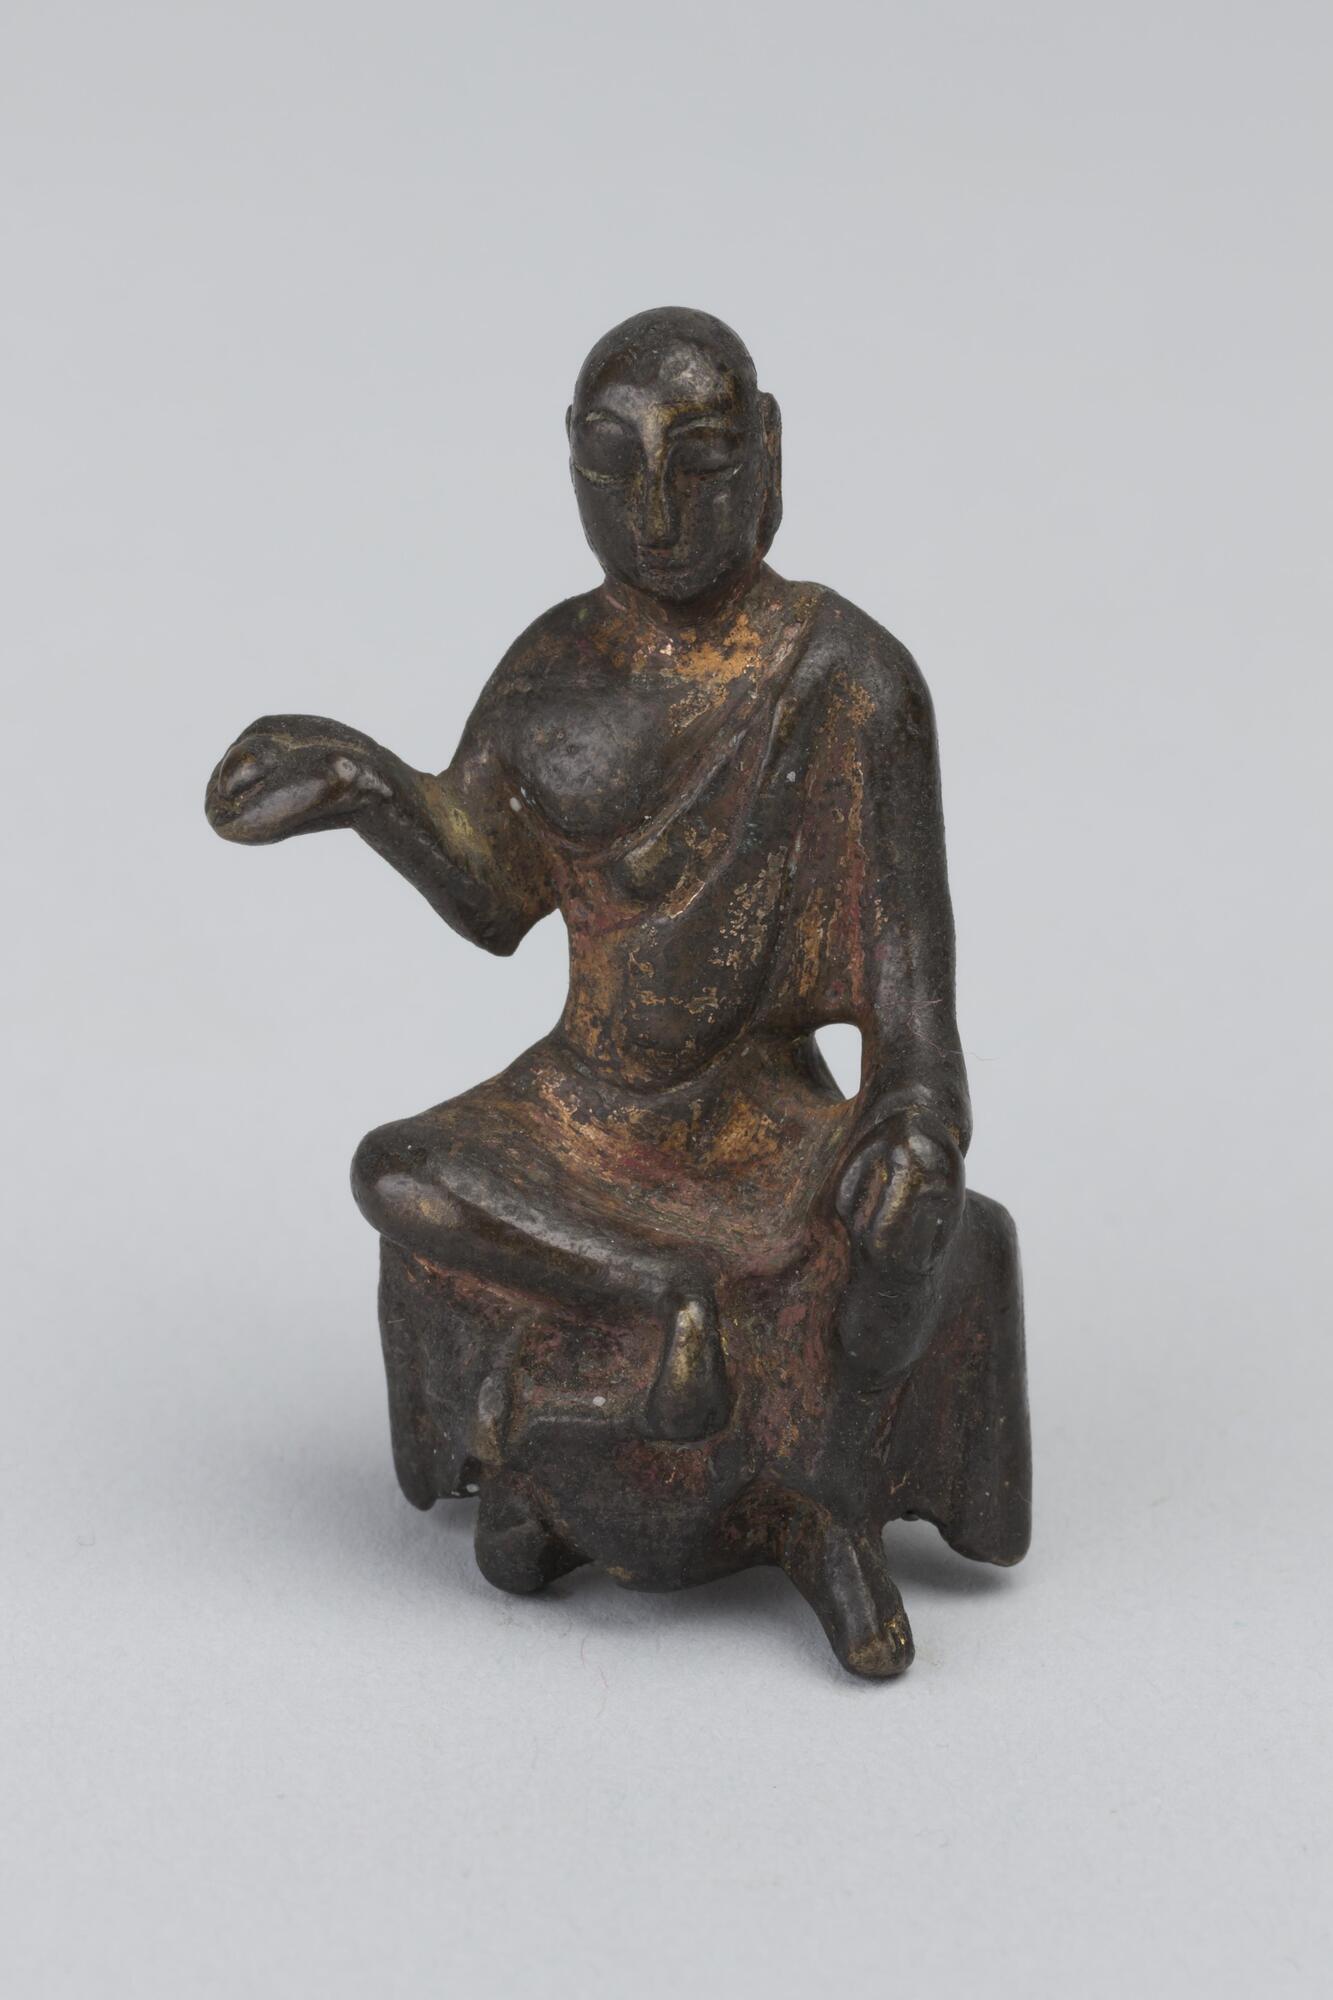 Seated figure with its right arm bent at the elbow and palm facing upward.